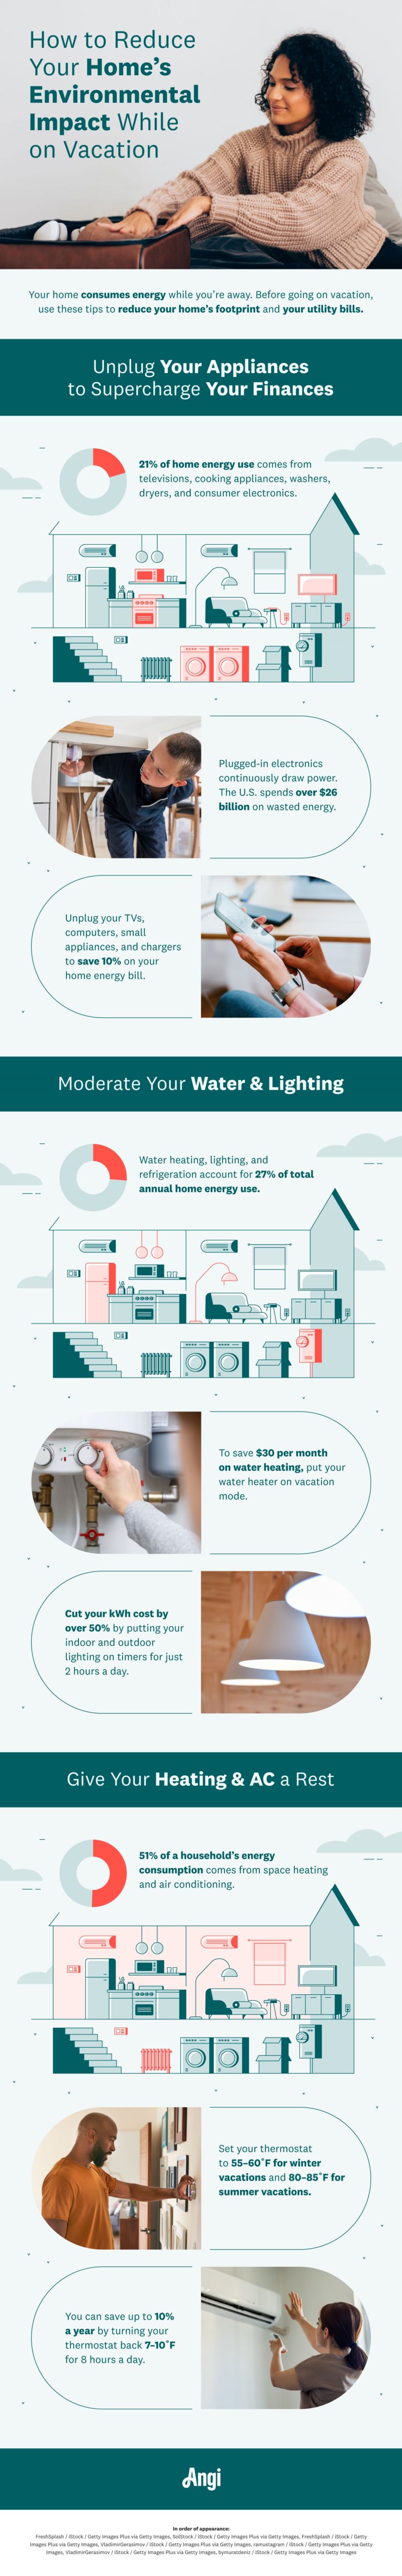 Infographic: prep home for vacation